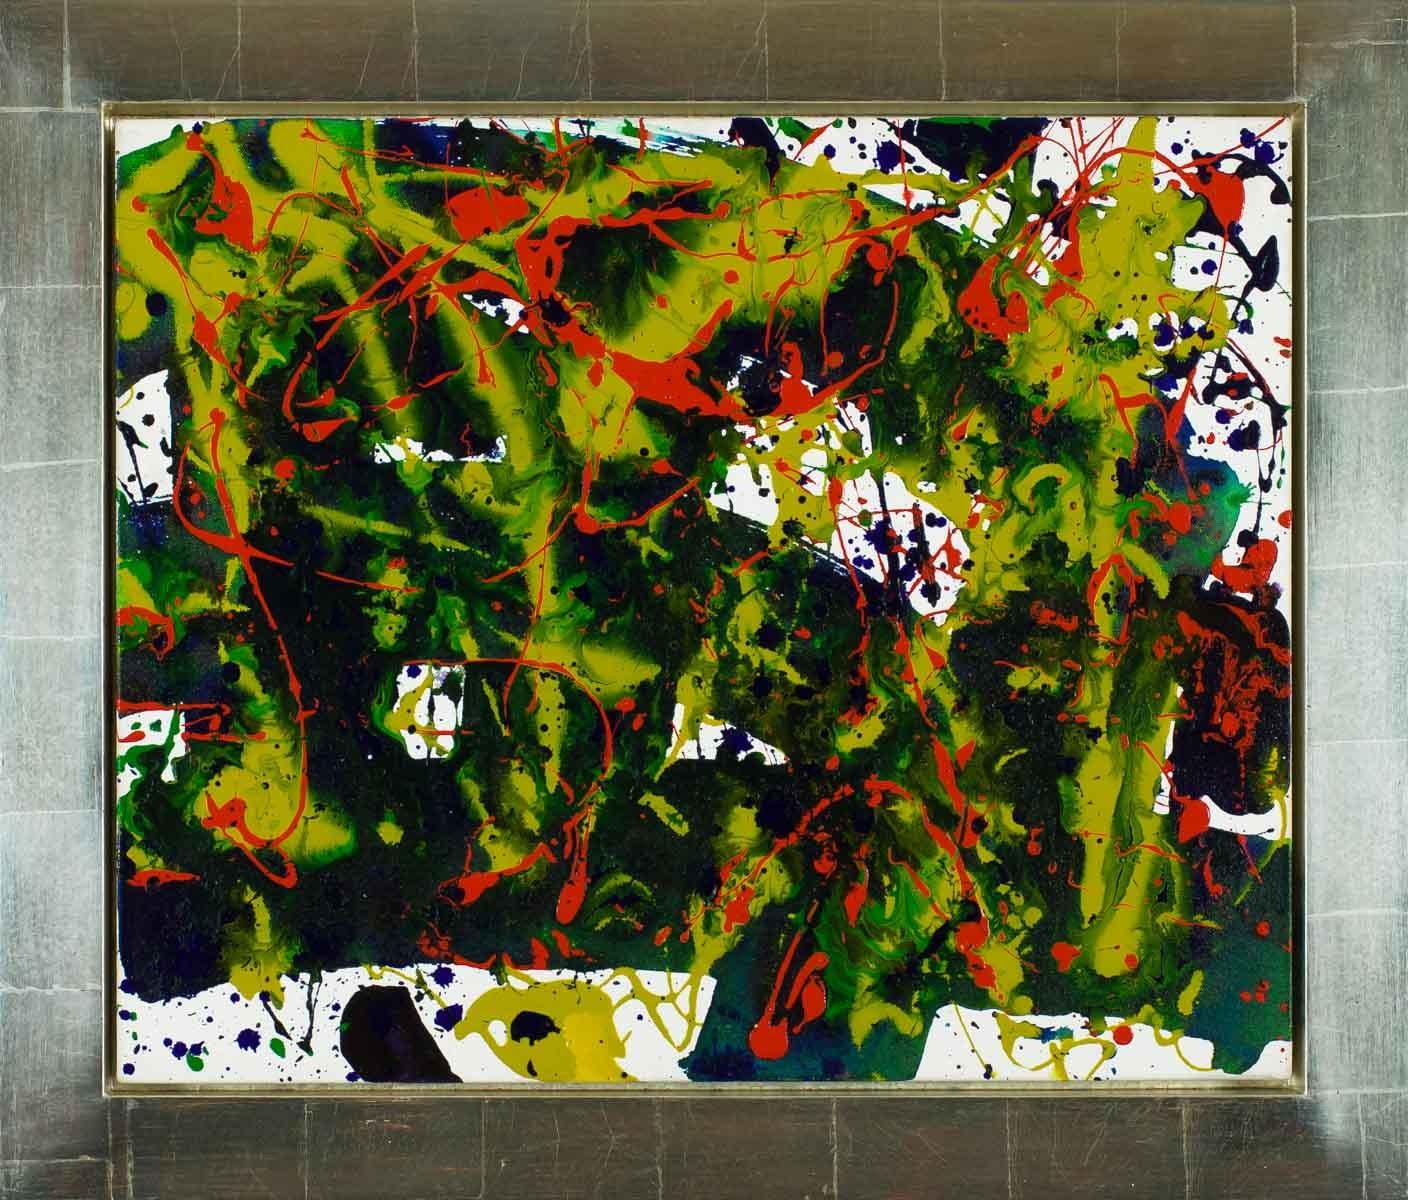 Untitled, 1994 (SFP94-36) - Painting by Sam Francis